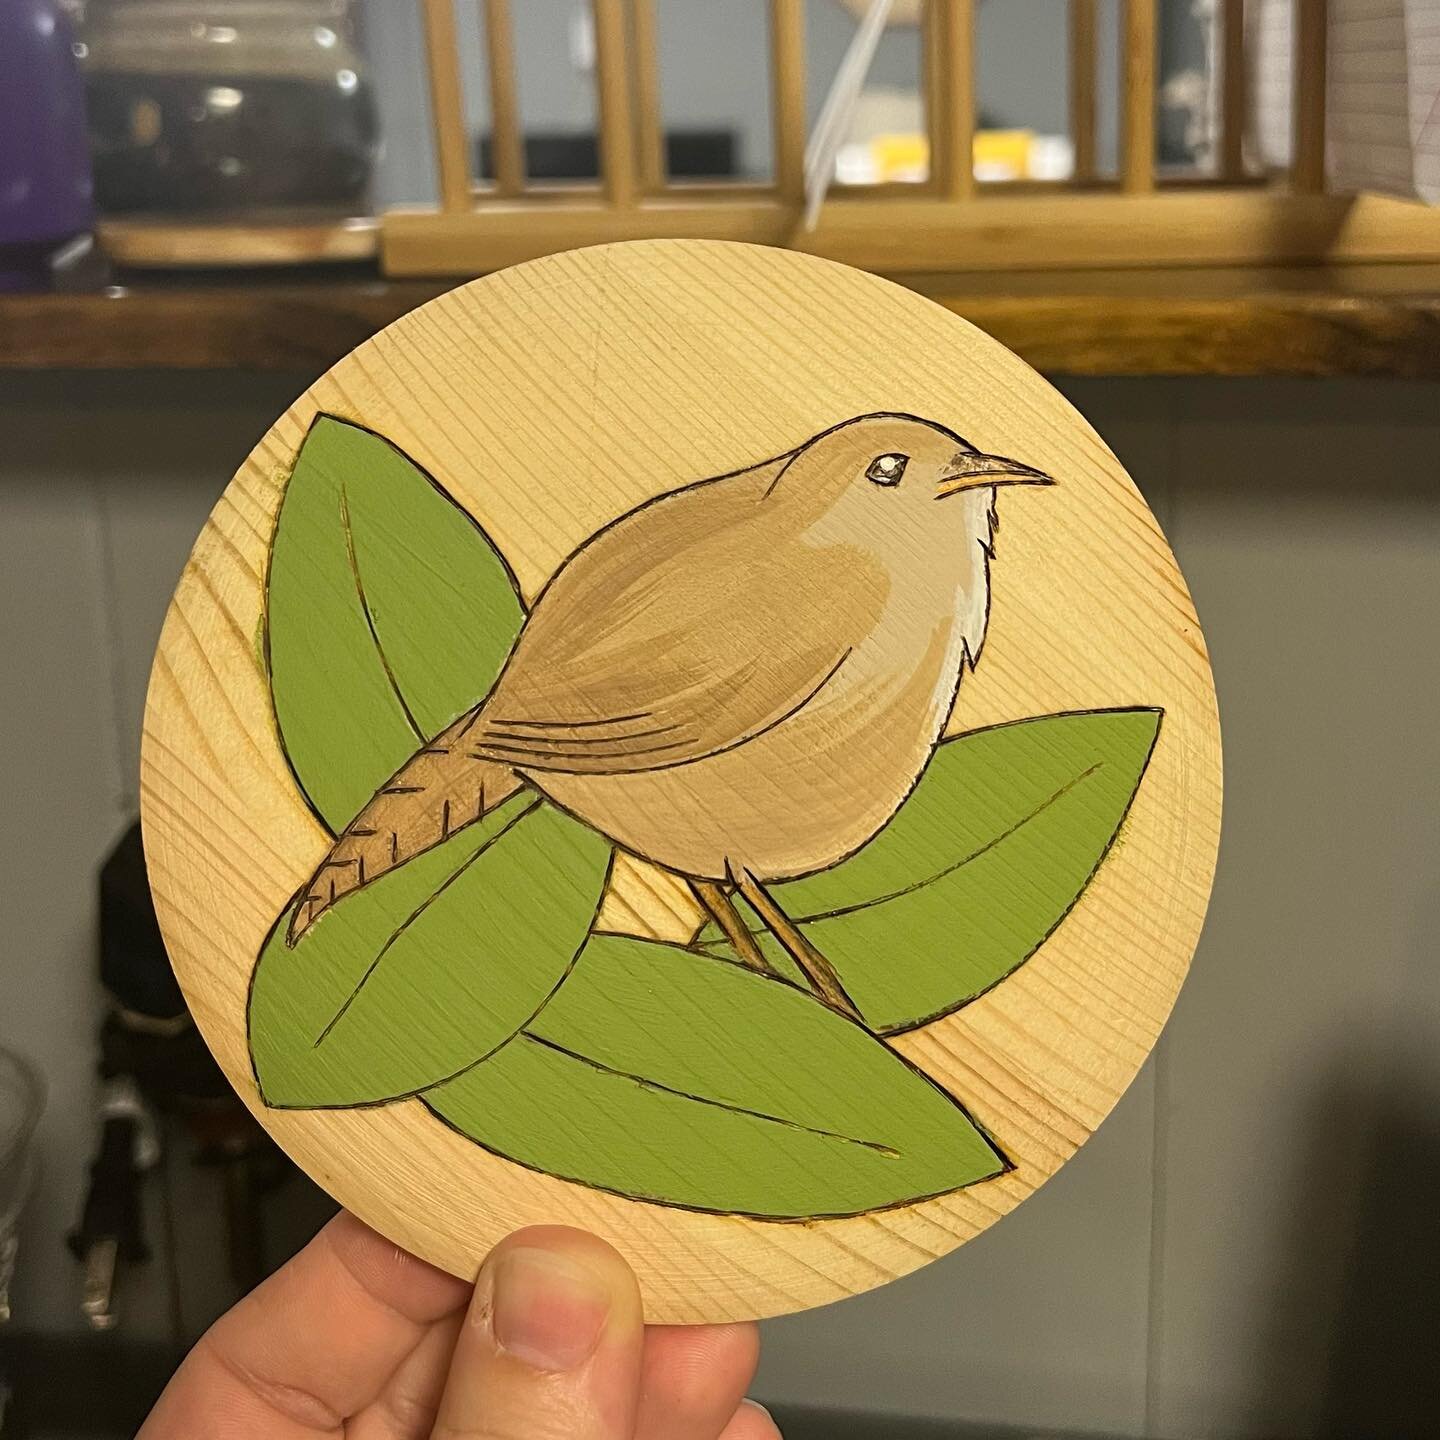 A recent jewelry box with a House Wren sitting among some leaves. This piece sold last weekend. 🙂

#housewren #bird #jewelrybox #woodburning #woodart #pyrography #artist #illinois #midwest #nature #drawing #painting